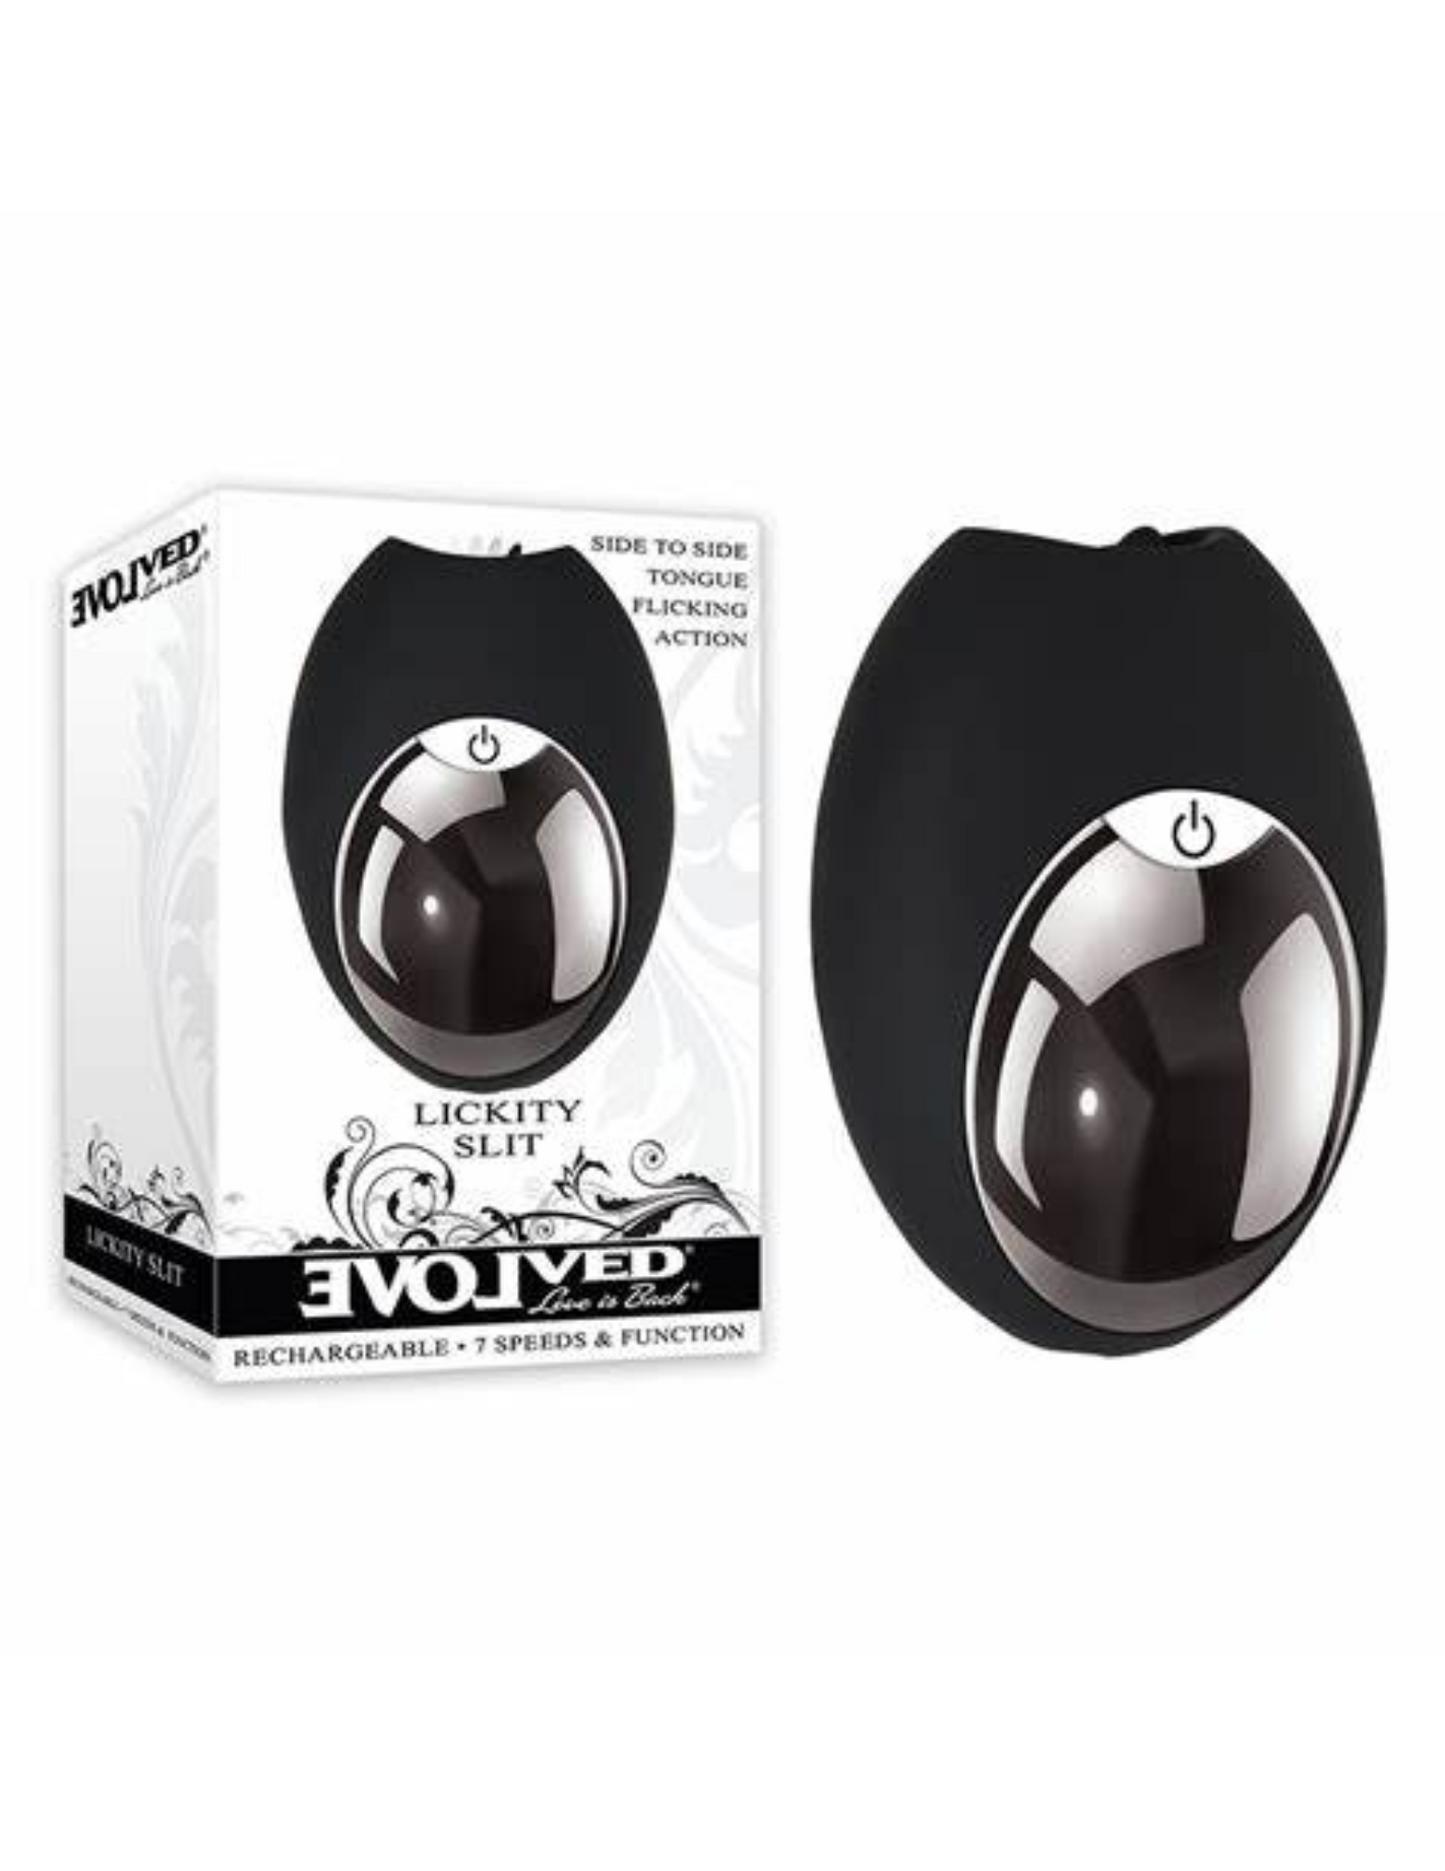 Photo shows the Evolved Lickity Slit Rechargeable Silicone Massager next to its box,